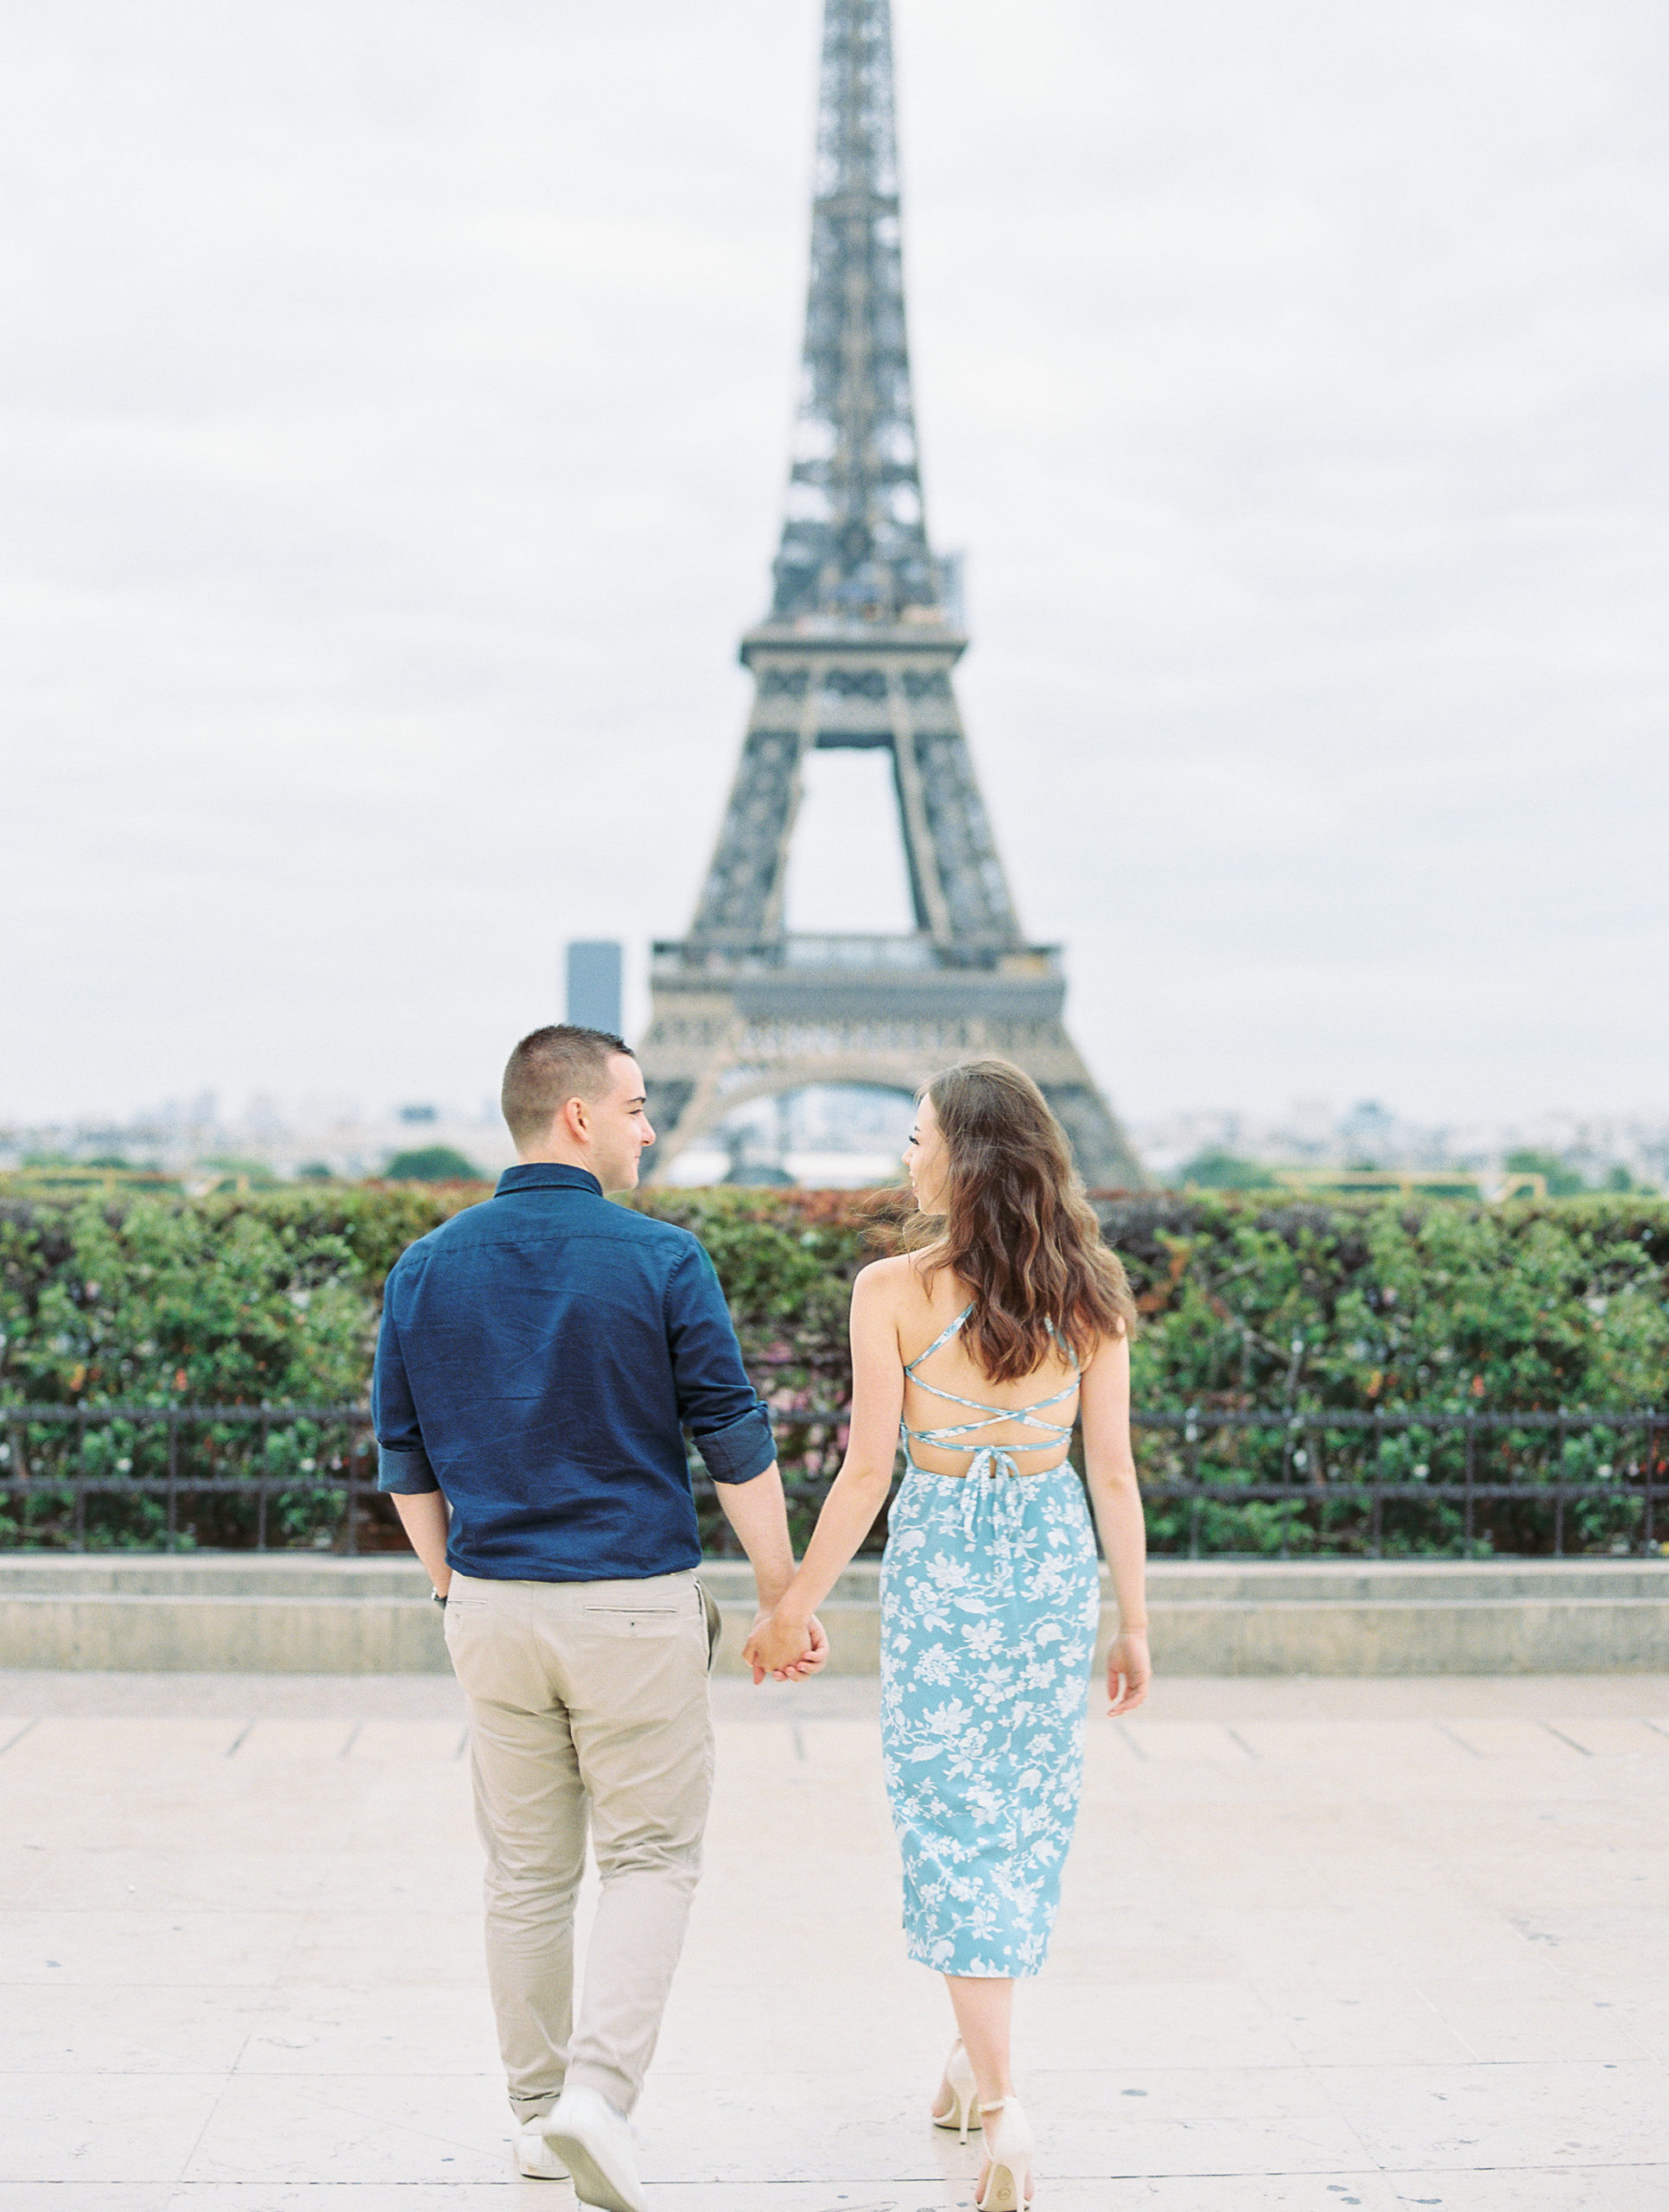 Couple smiles and holds hands walking towards Eiffel Tower on stone pathway for Paris Film Photographer